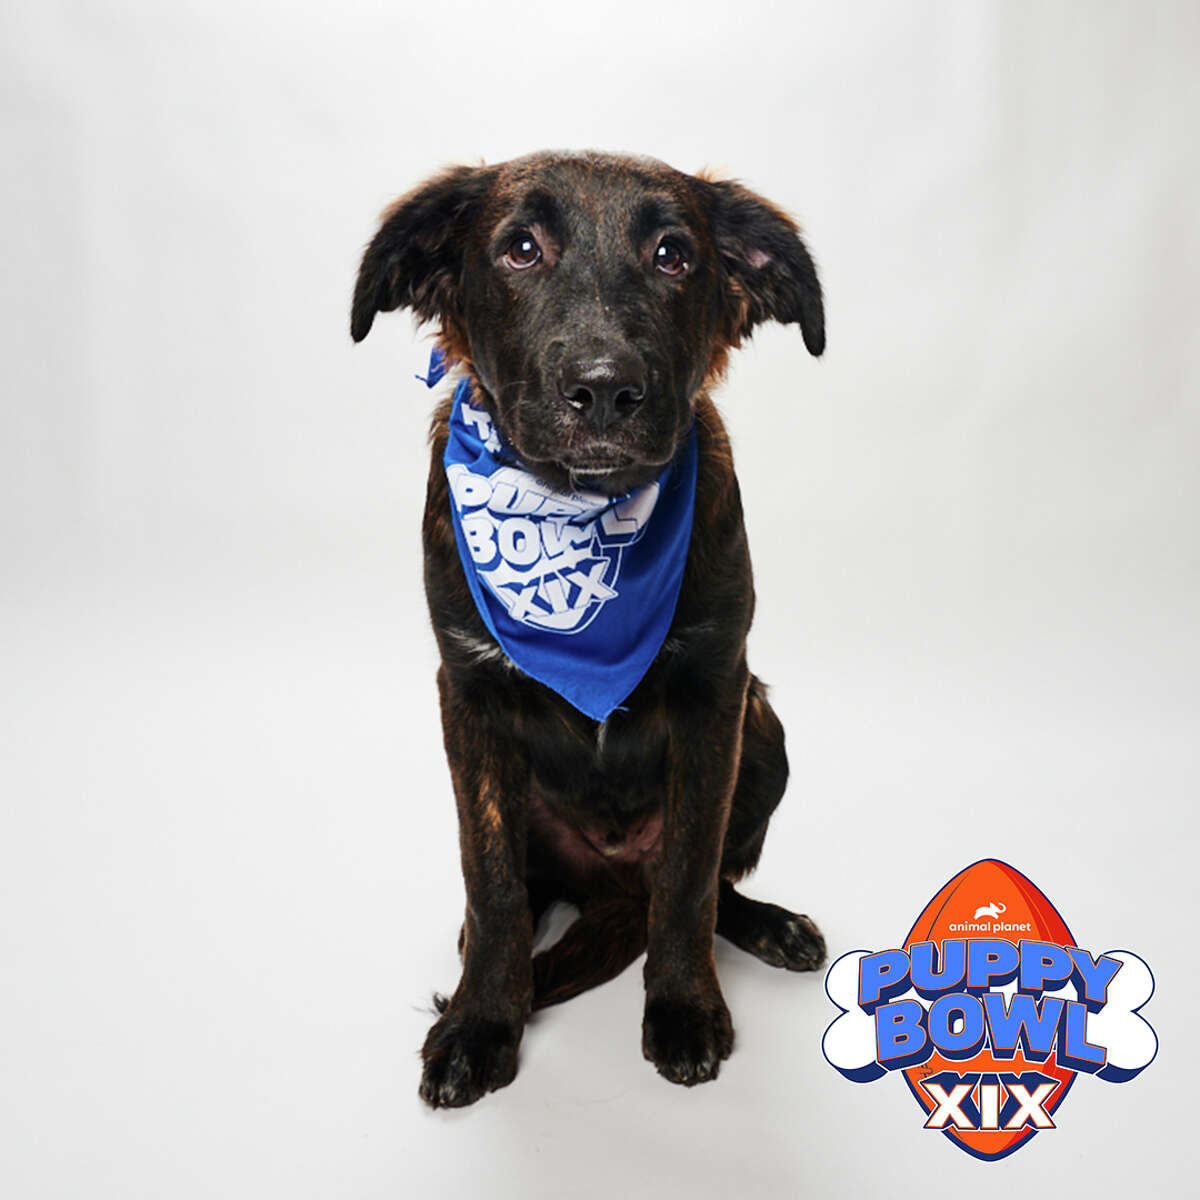 Maverick from Dog Star Rescue will play in this year's Puppy Bowl on Sunday, Feb. 12.